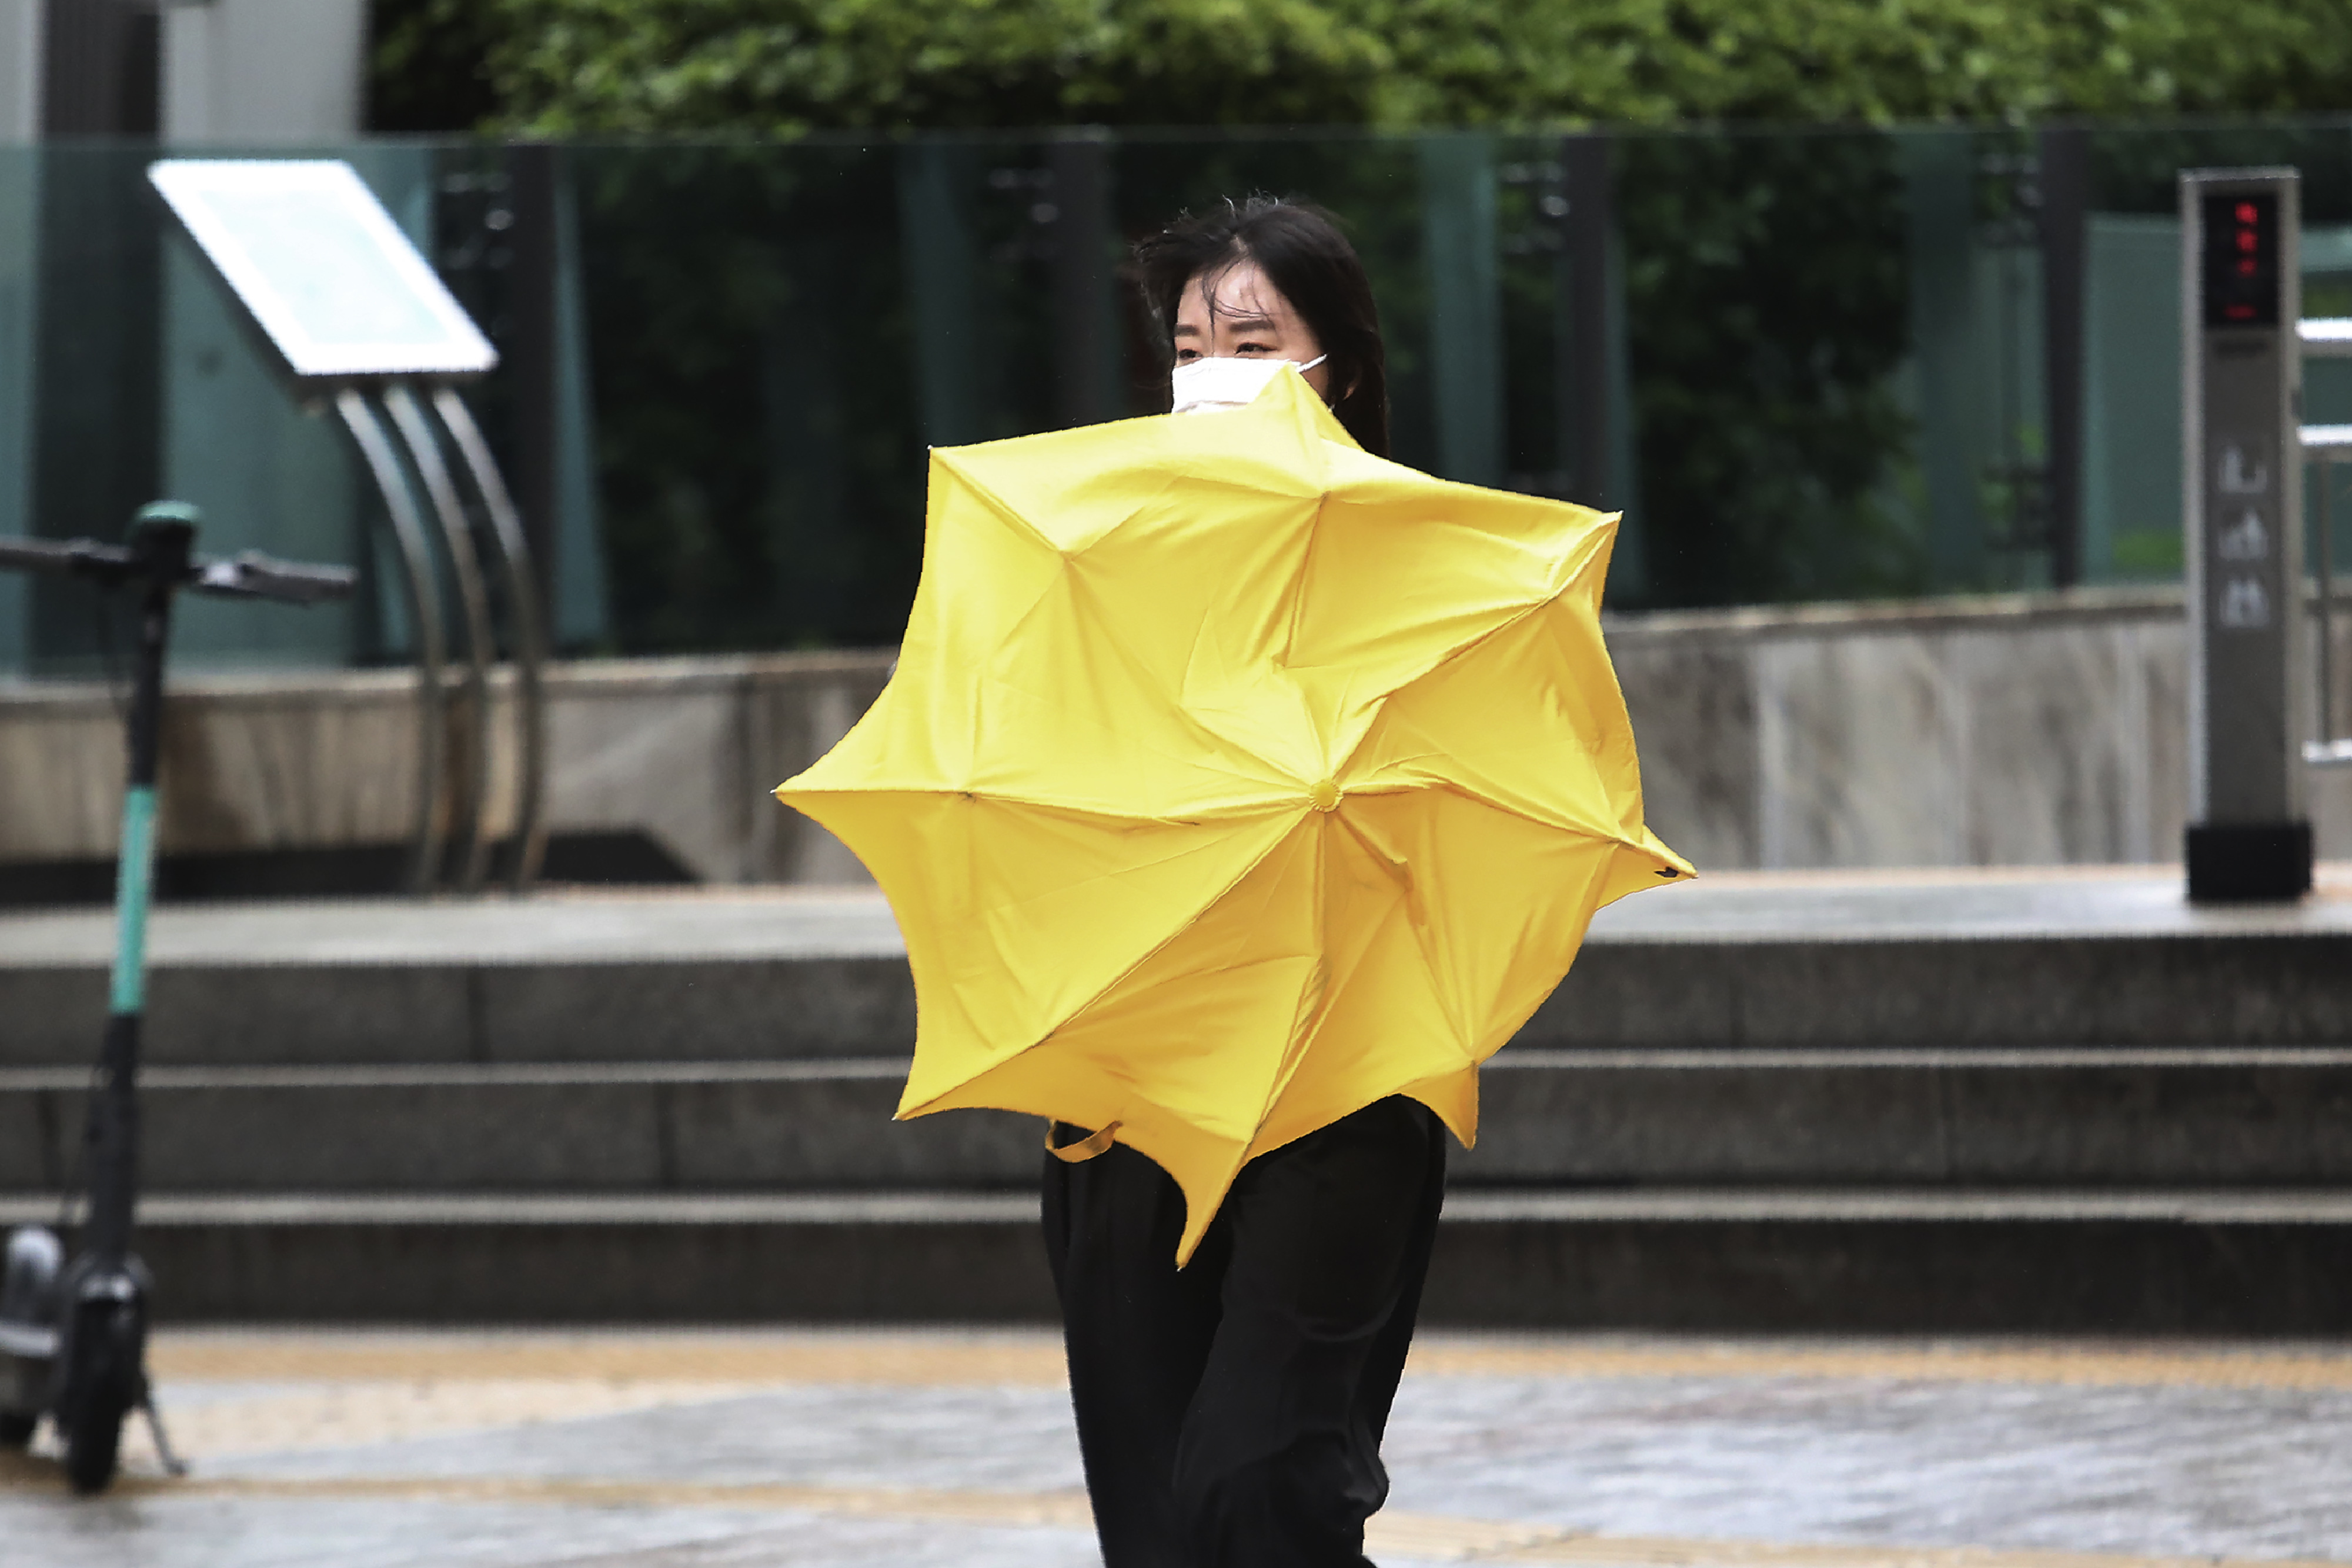 A woman holds an umbrella against the strong wind and rain caused by Typhoon Bavi in Seoul, South Korea, Thursday, Aug. 27, 2020. Typhoon Bavi that grazed South Korea and caused some damage has made landfall in North Korea early Thursday. South Korean authorities said there were no immediate reports of casualties, and North Korea has not reported any damages. Photo: AP